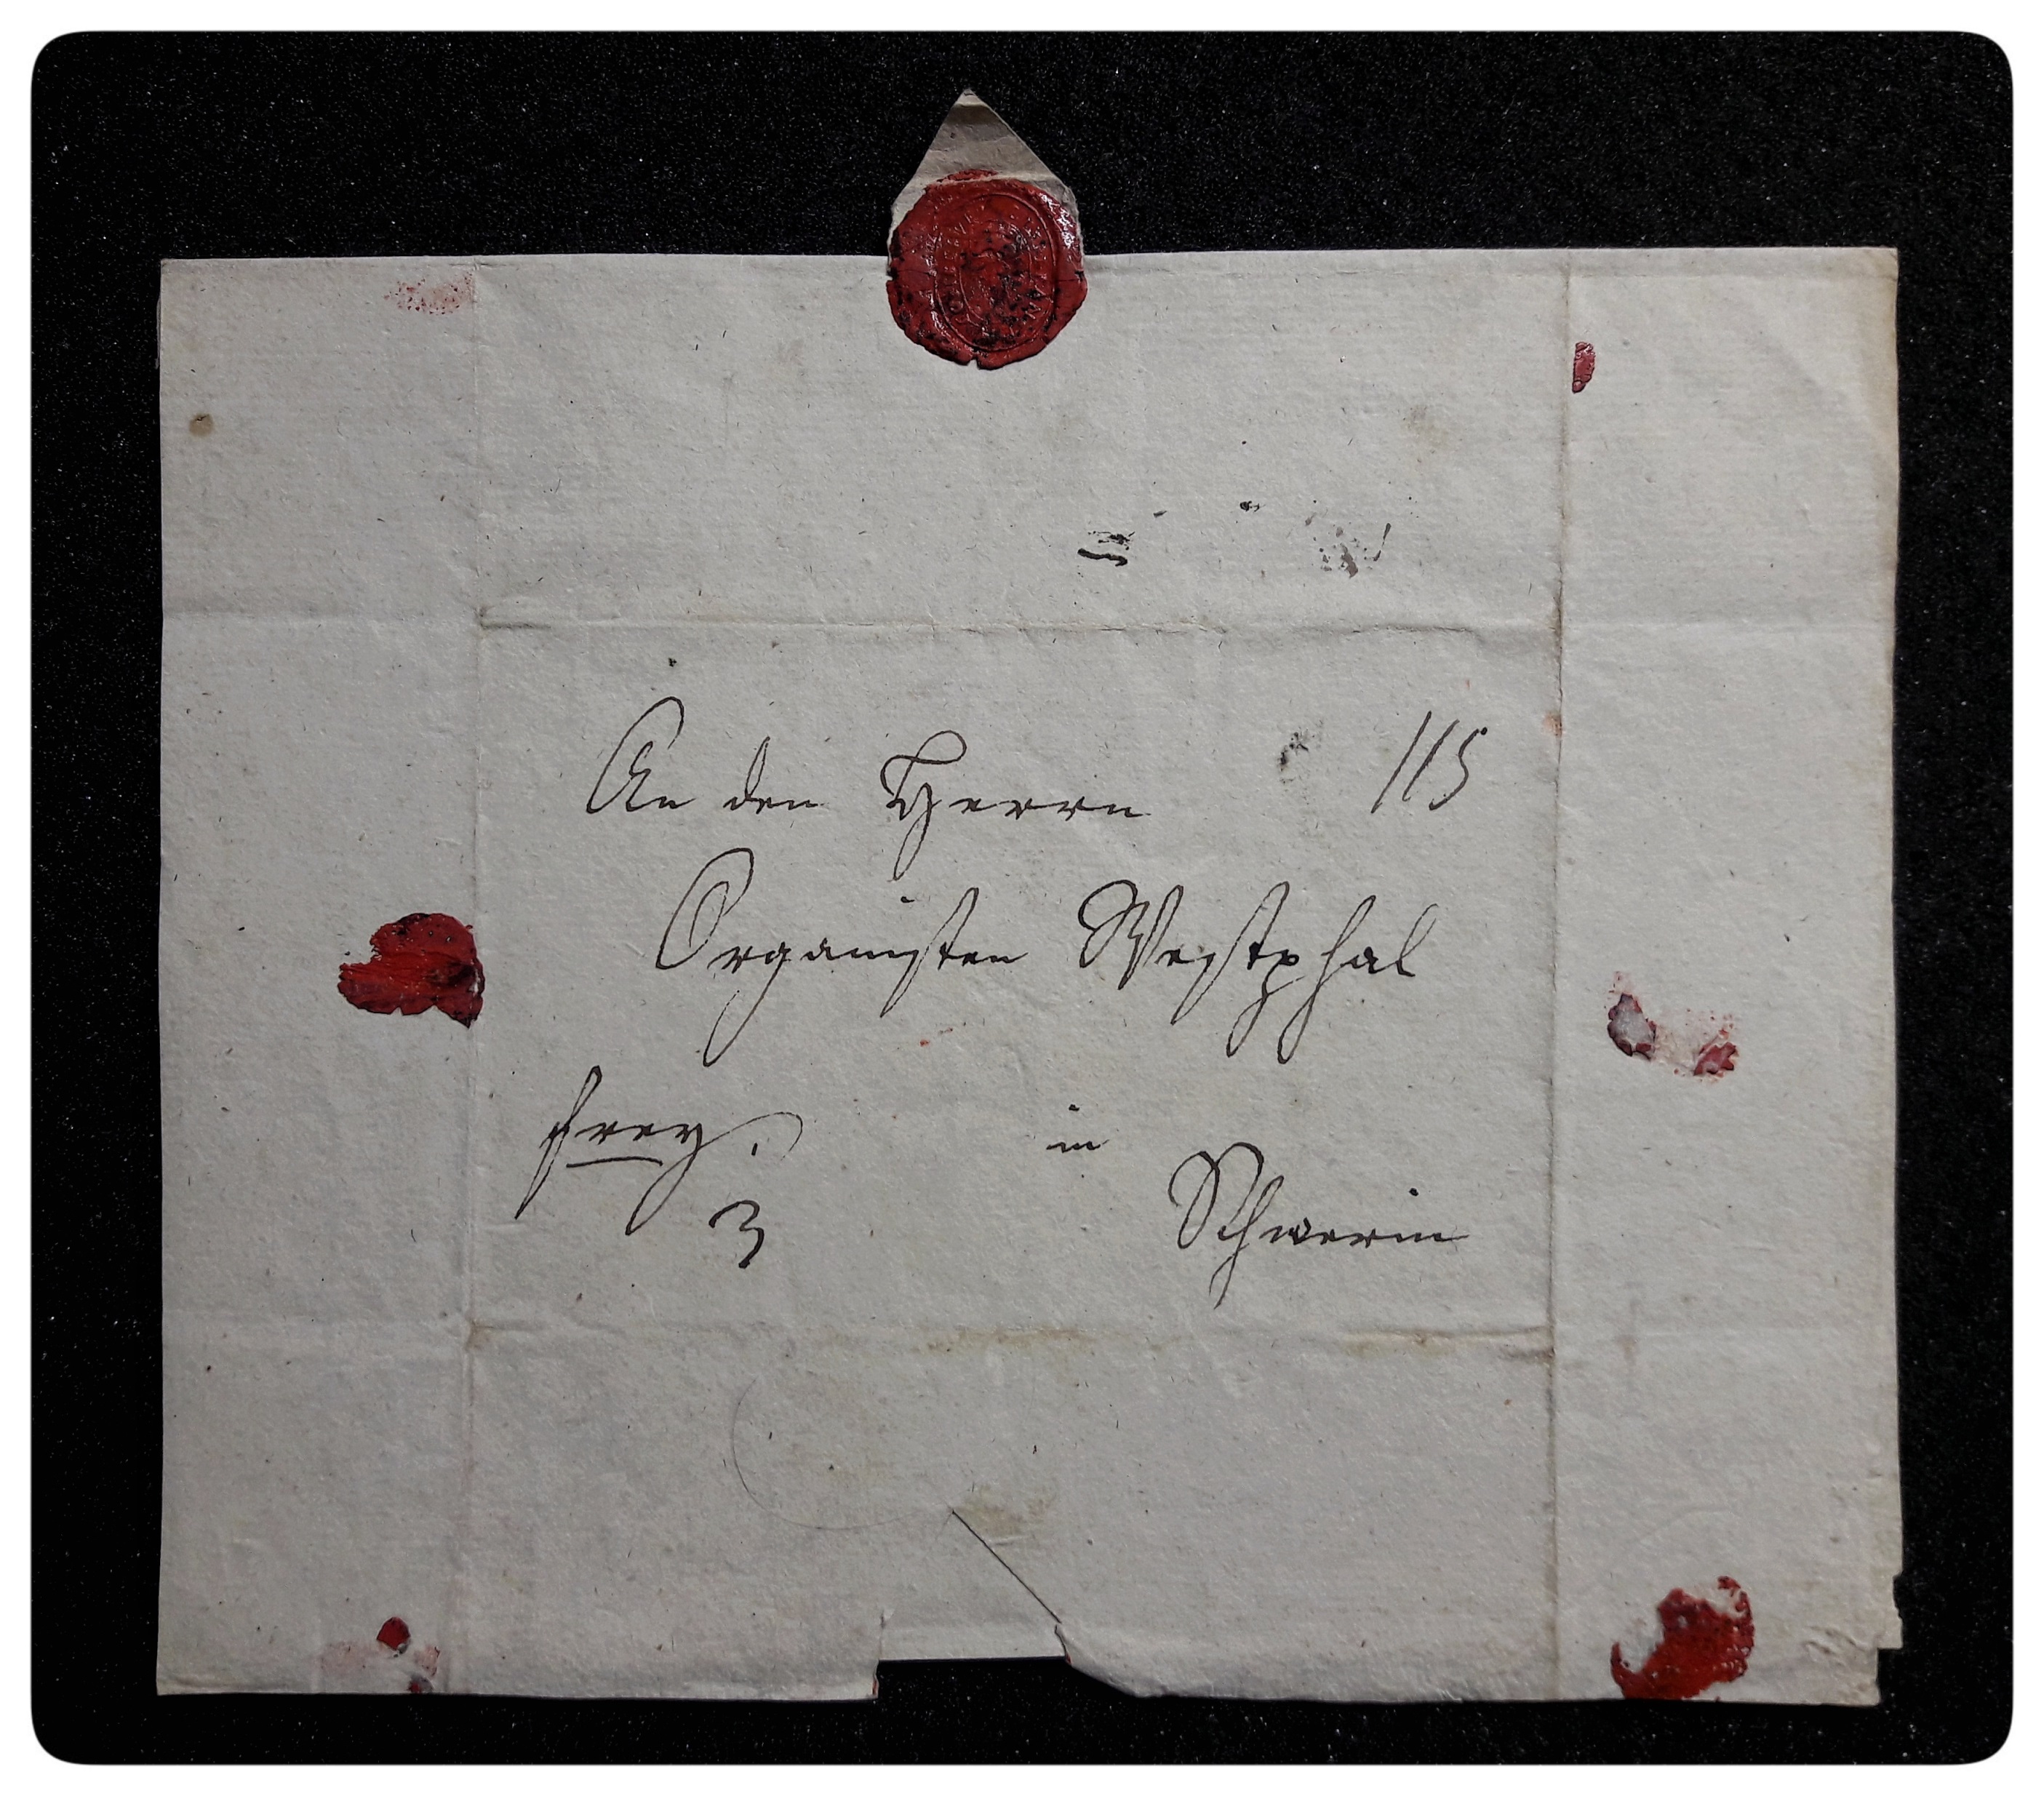 Envelope with the seal of C.P.E. Bach's widow Johanna Maria